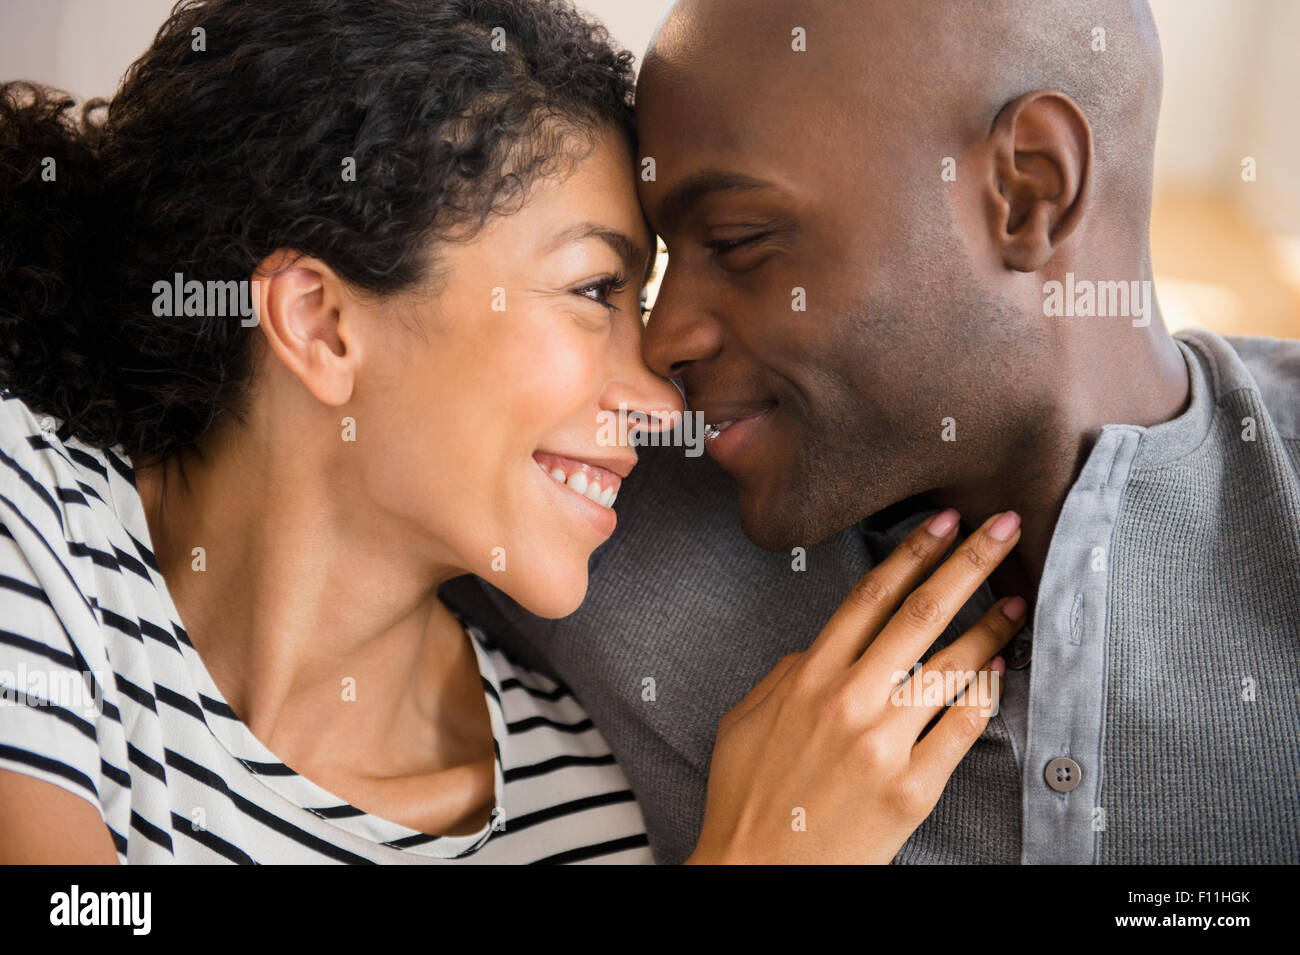 Close up of smiling couple rubbing noses Stock Photo